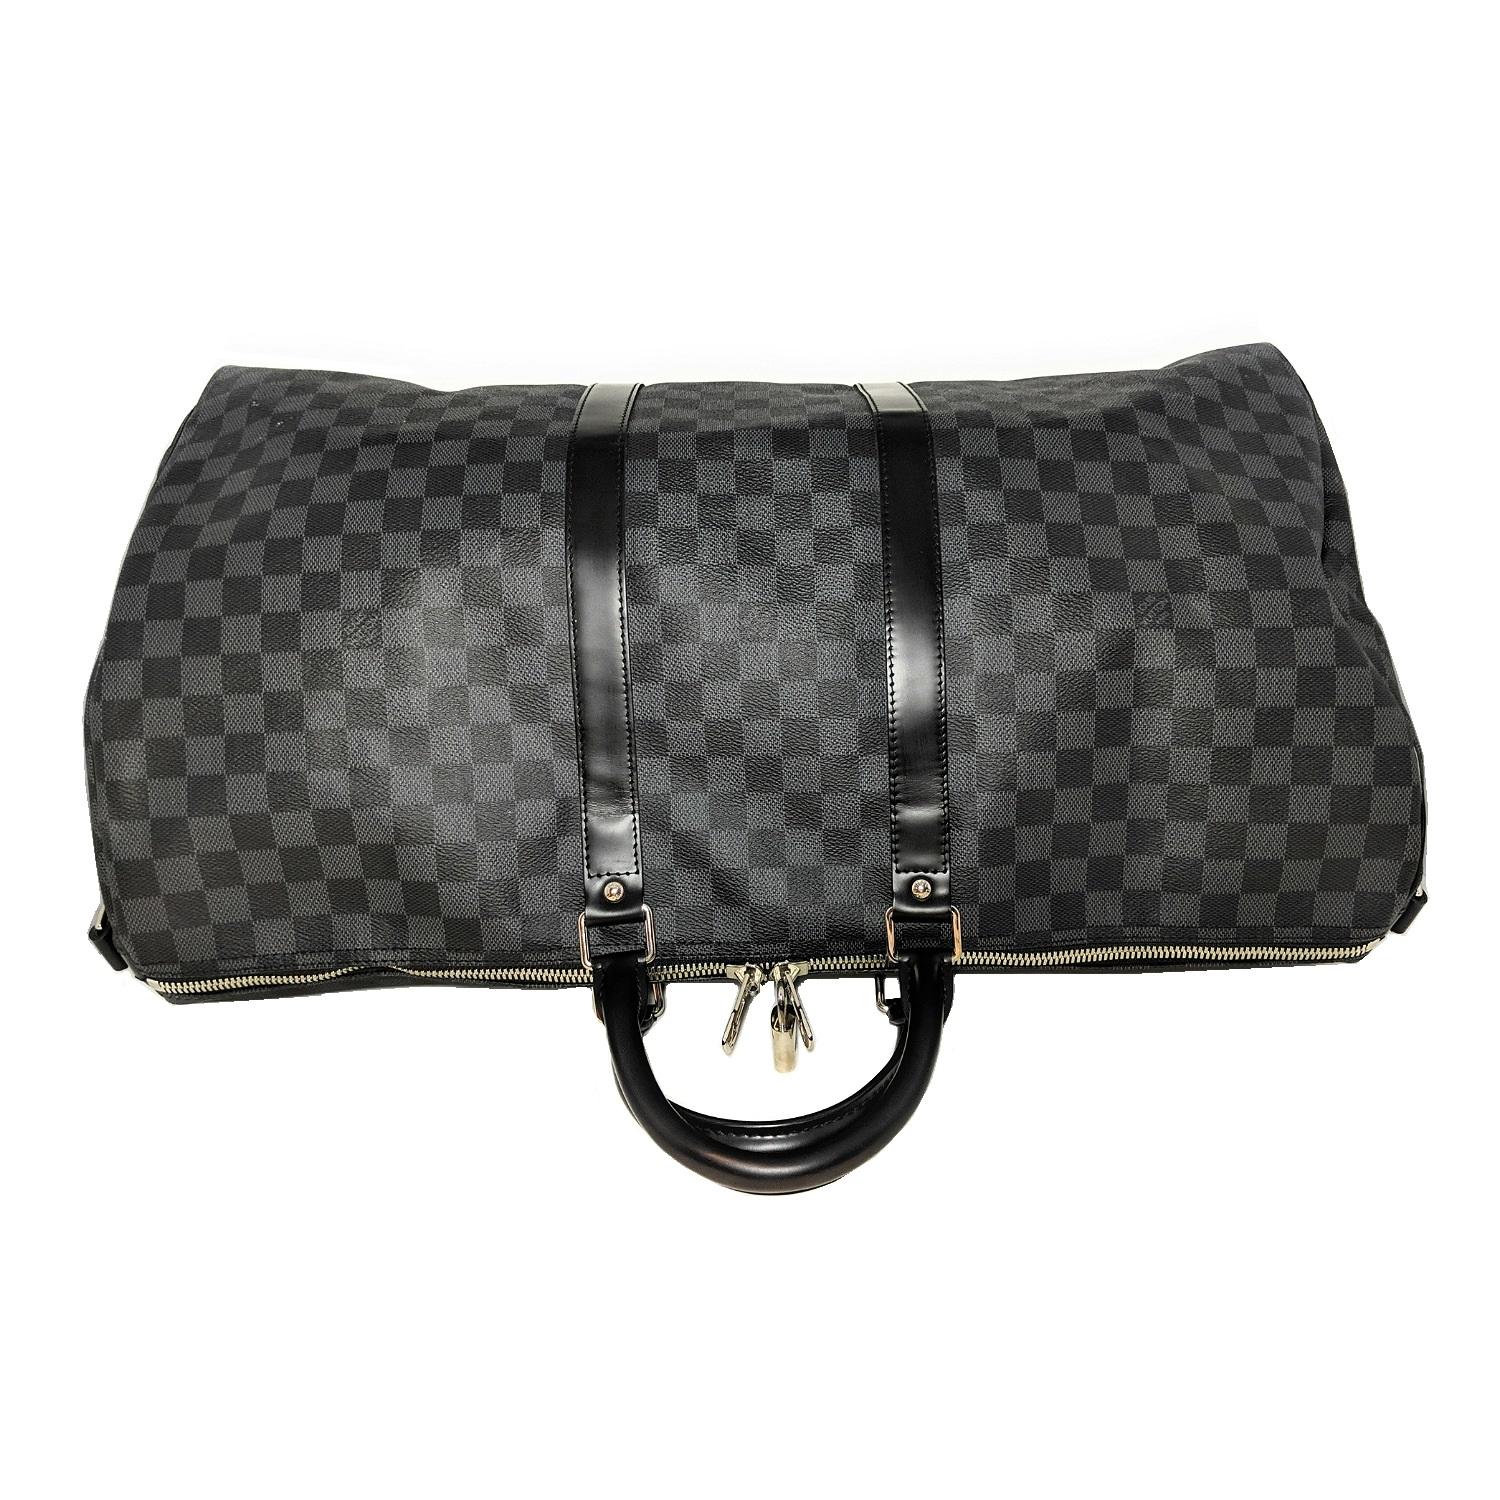 Louis Vuitton Damier Graphite Keepall Bandouliere 55 Luggage 1